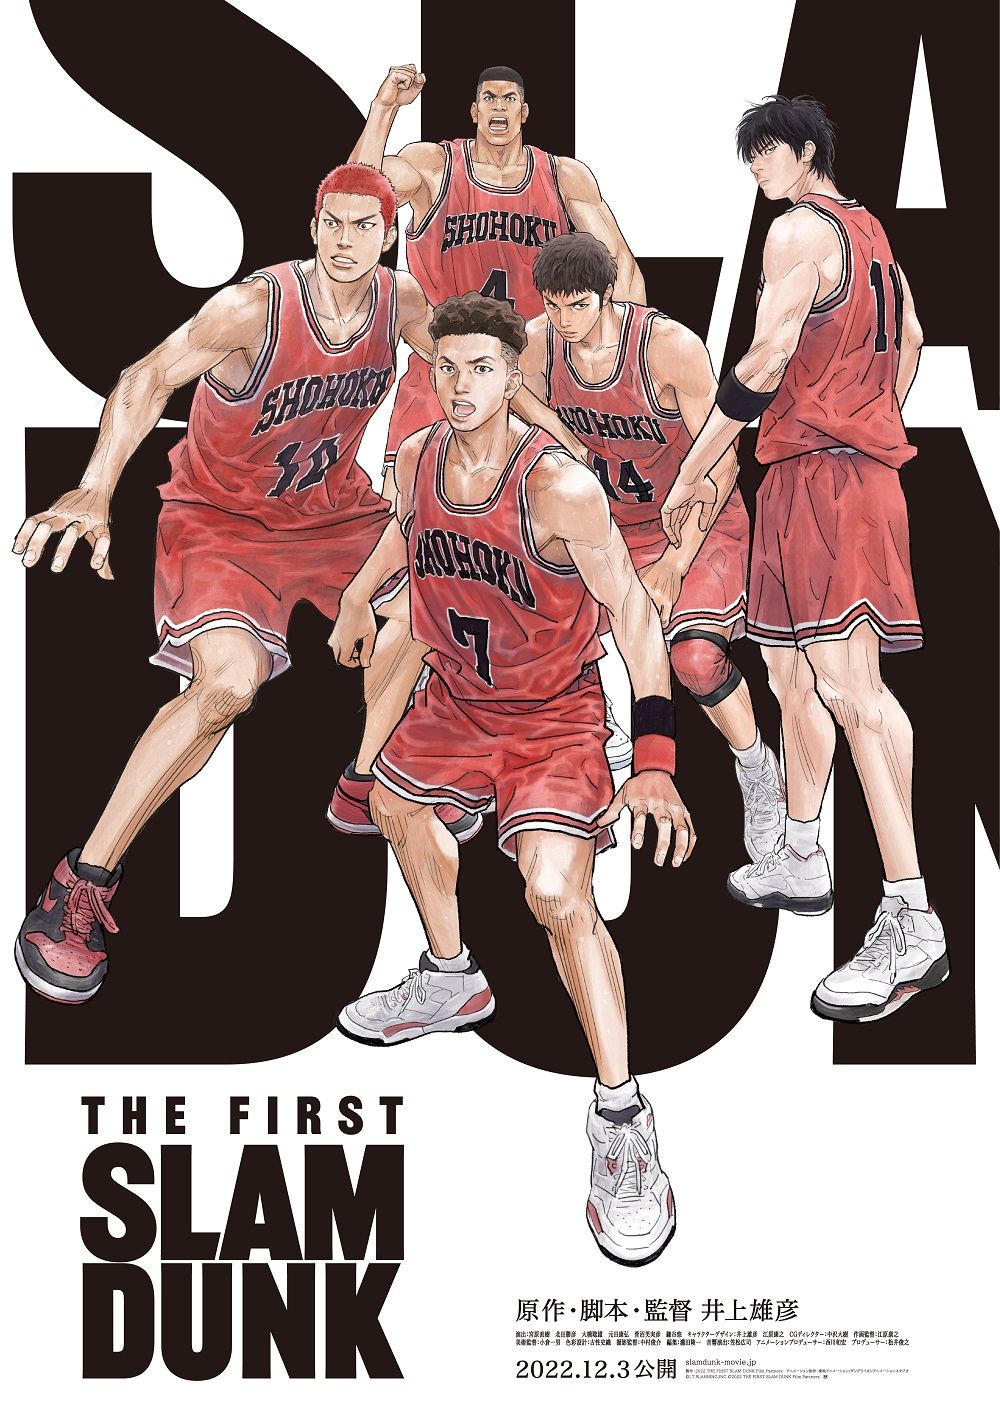 『THE FIRST SLAM DUNK』公開中（C）I.T.PLANNING, INC.（C）2022 THE FIRST SLAM DUNK Film Partners